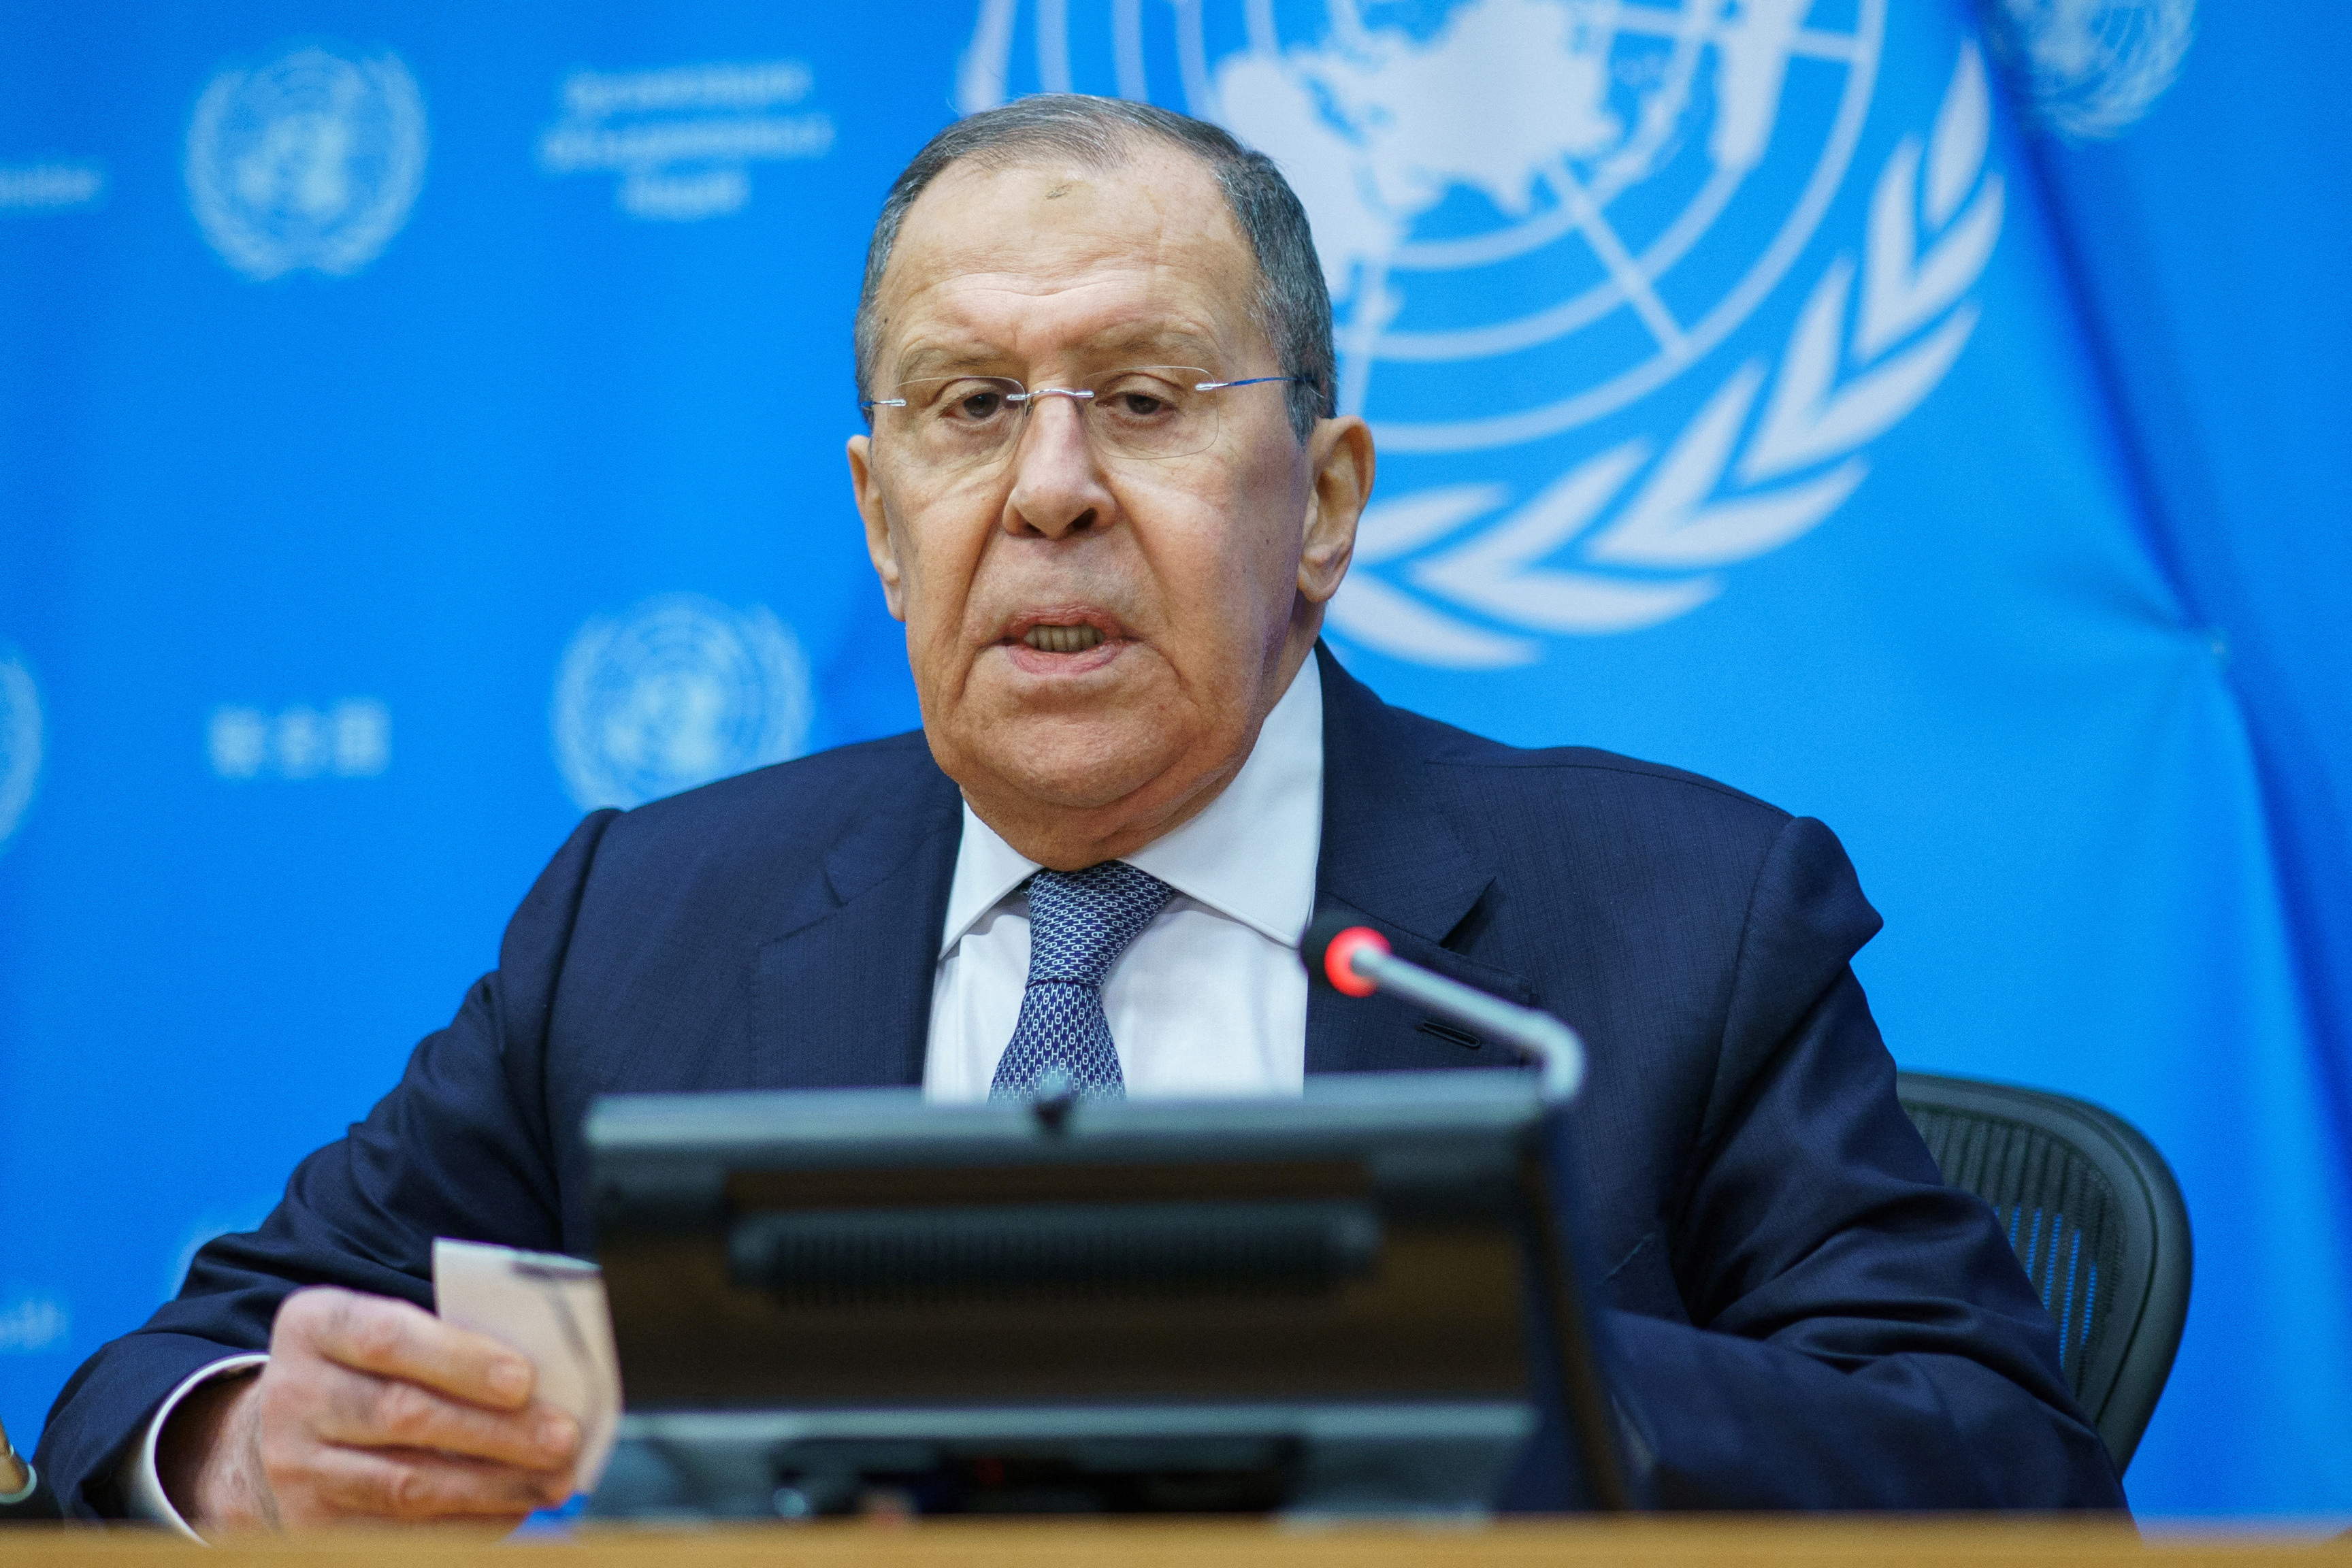 Russian Foreign Minister Sergey Lavrov speaks during a press conference at the United Nations in New York on January 24.